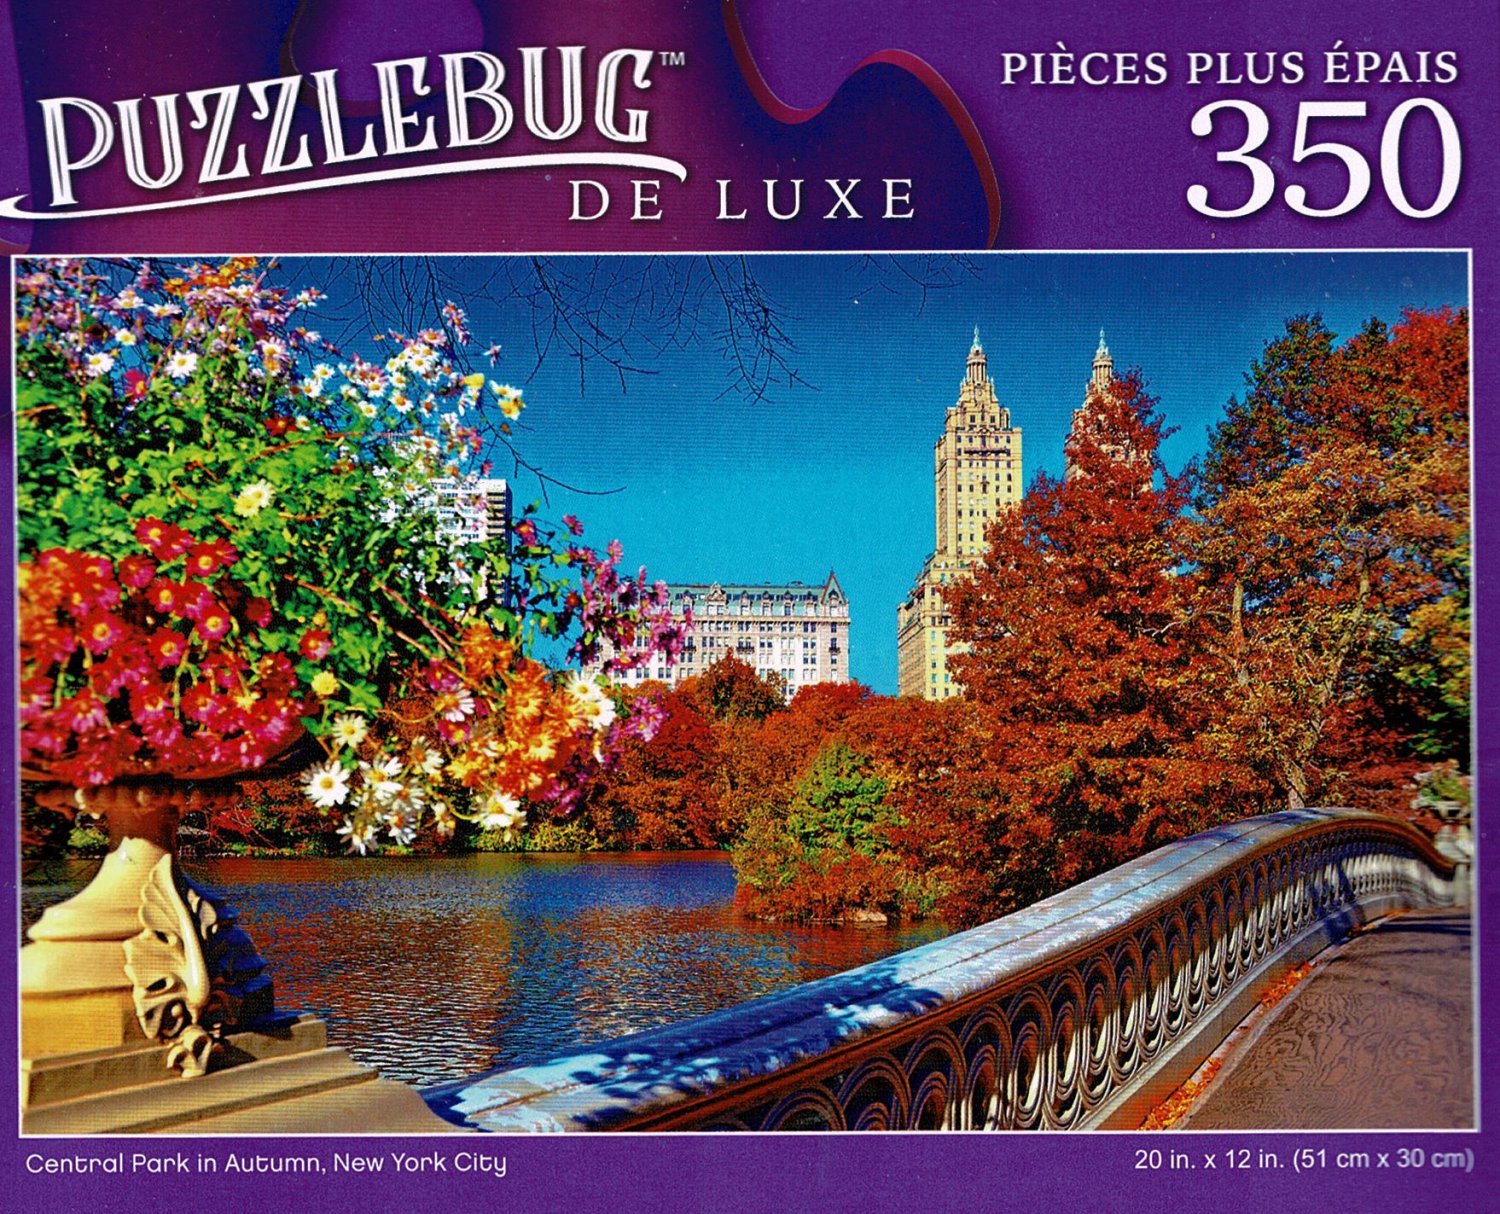 Central Park in Autumn - 350 Pieces Deluxe Jigsaw Puzzle